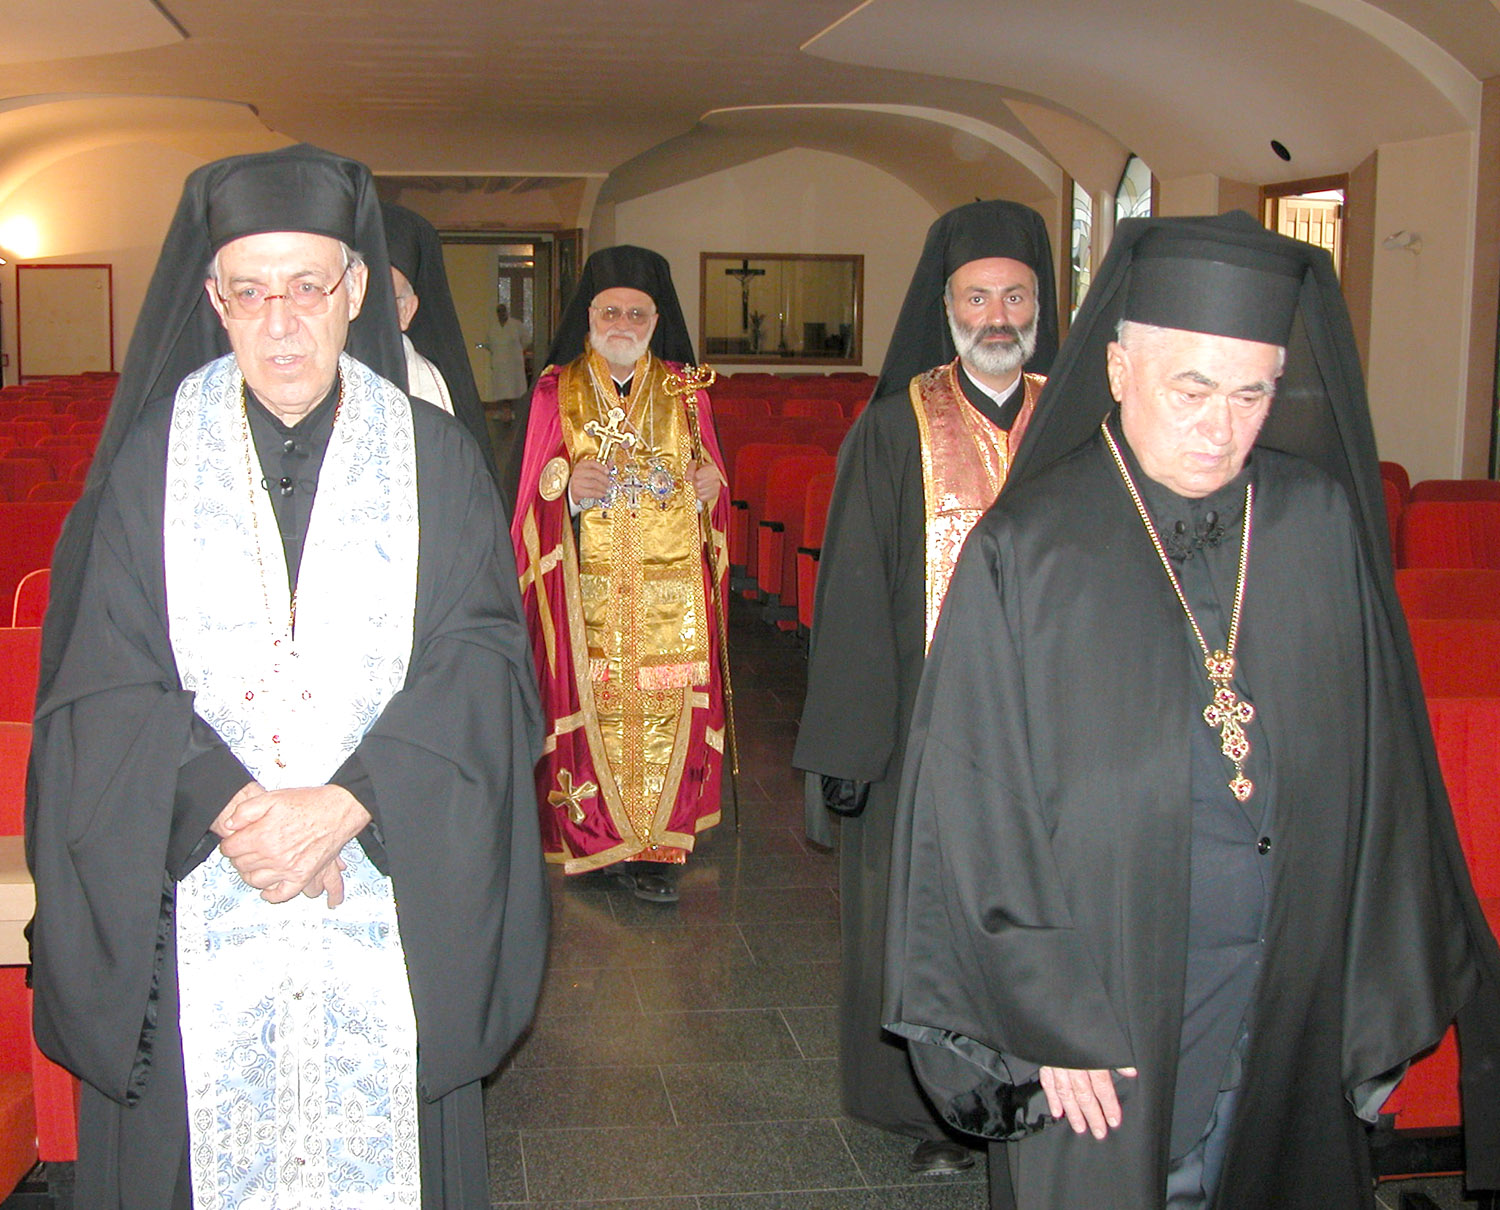 Melkite Patriarch Gregory III with some Archimadrites